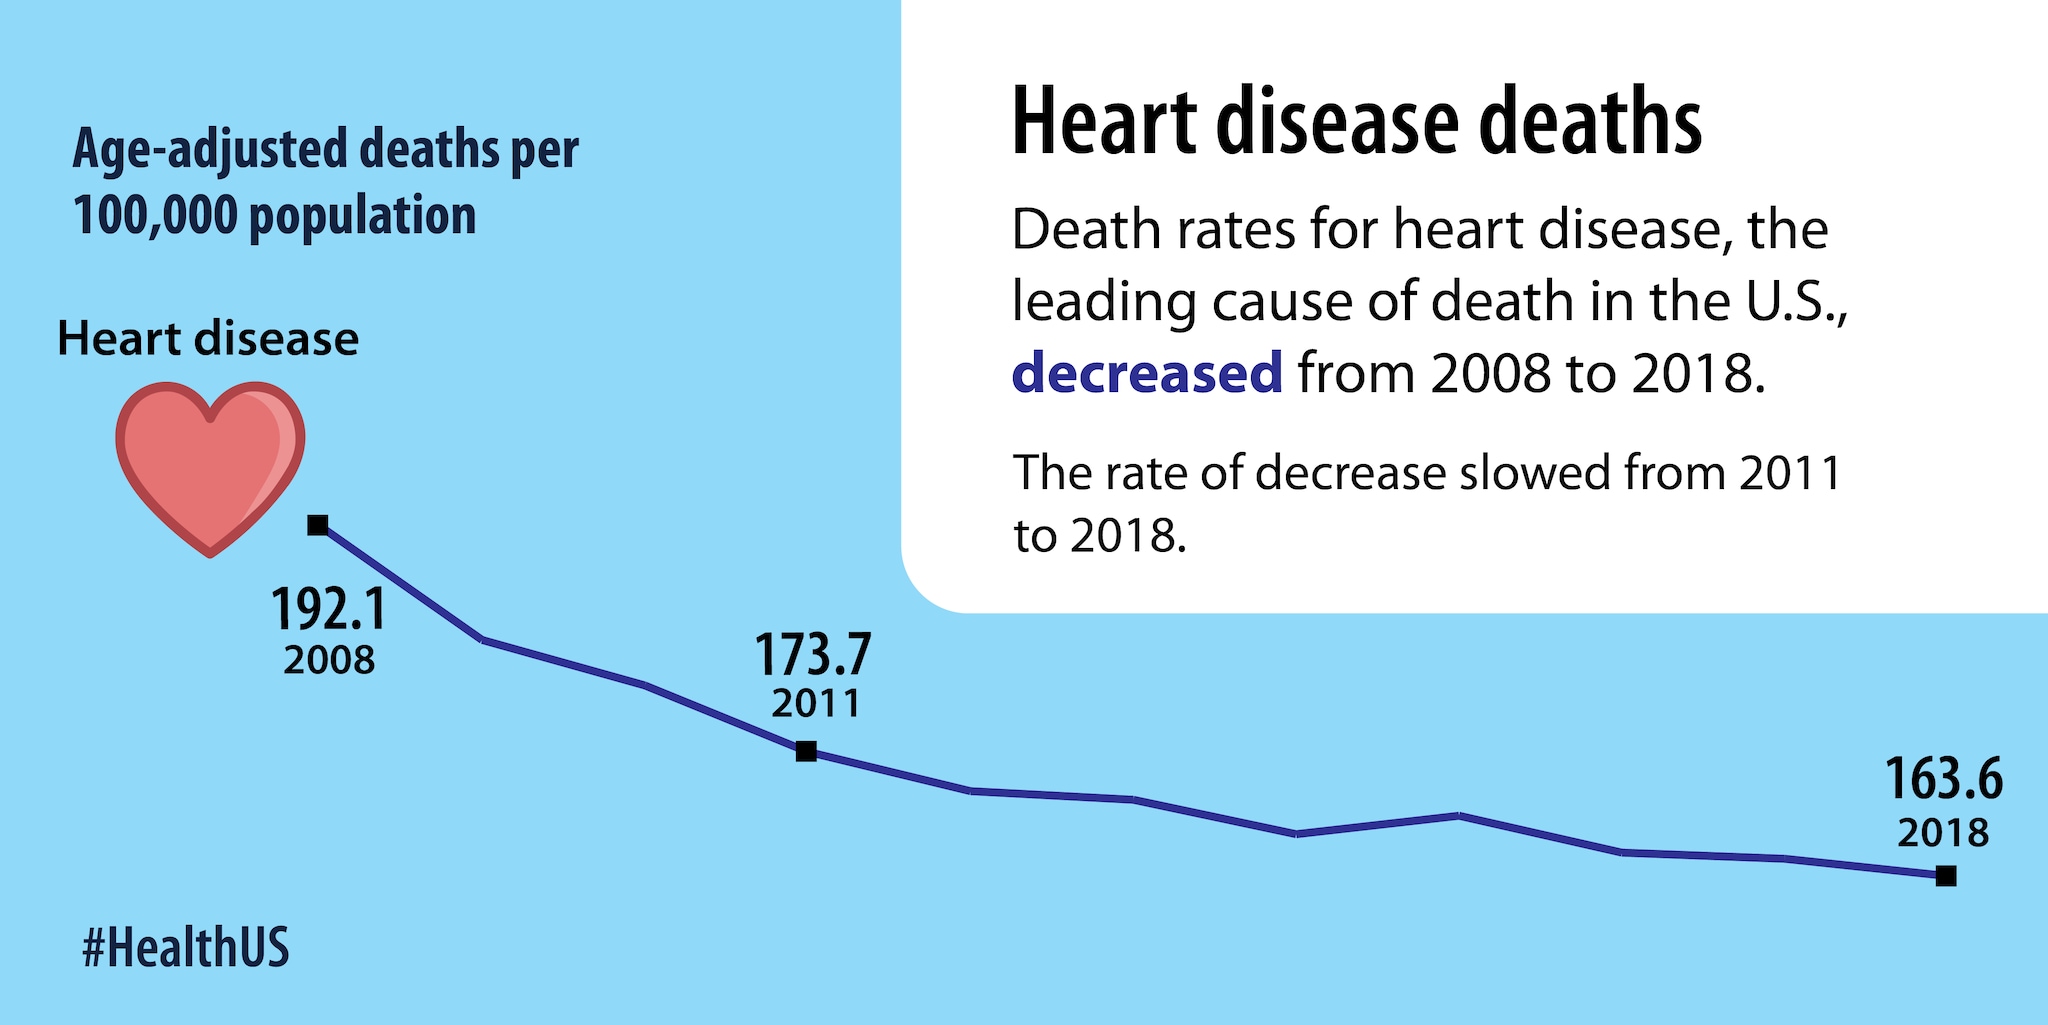 Death rates for heart disease, the leading cause of death in the U.S., decreased from 2008 to 2018.